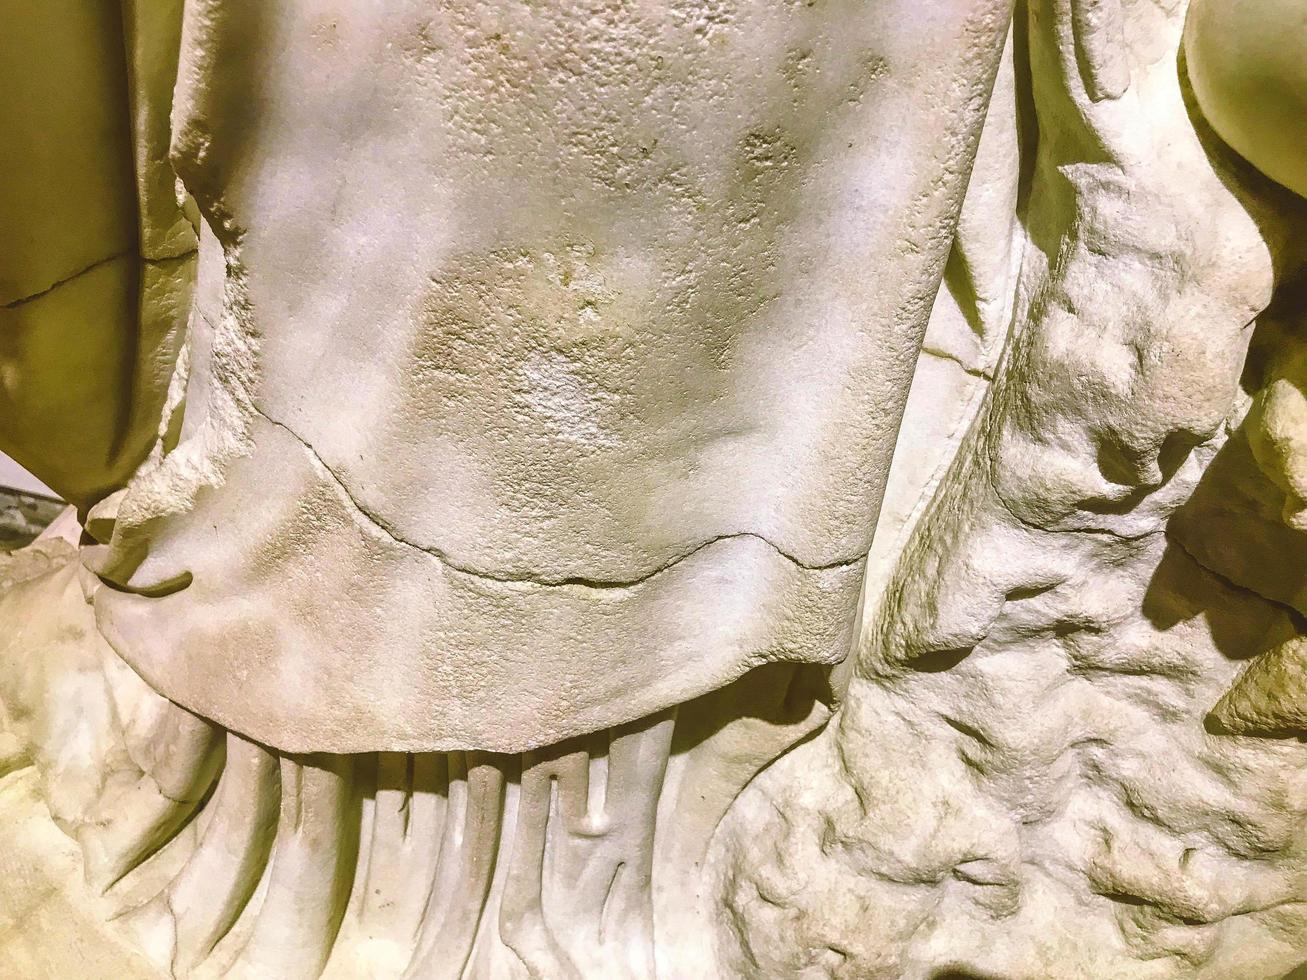 three-dimensional texture, plaster sculpture, ancient art. on the texture of scuffs, chips, cracks. sculpture in the form of a human neck with cracks photo